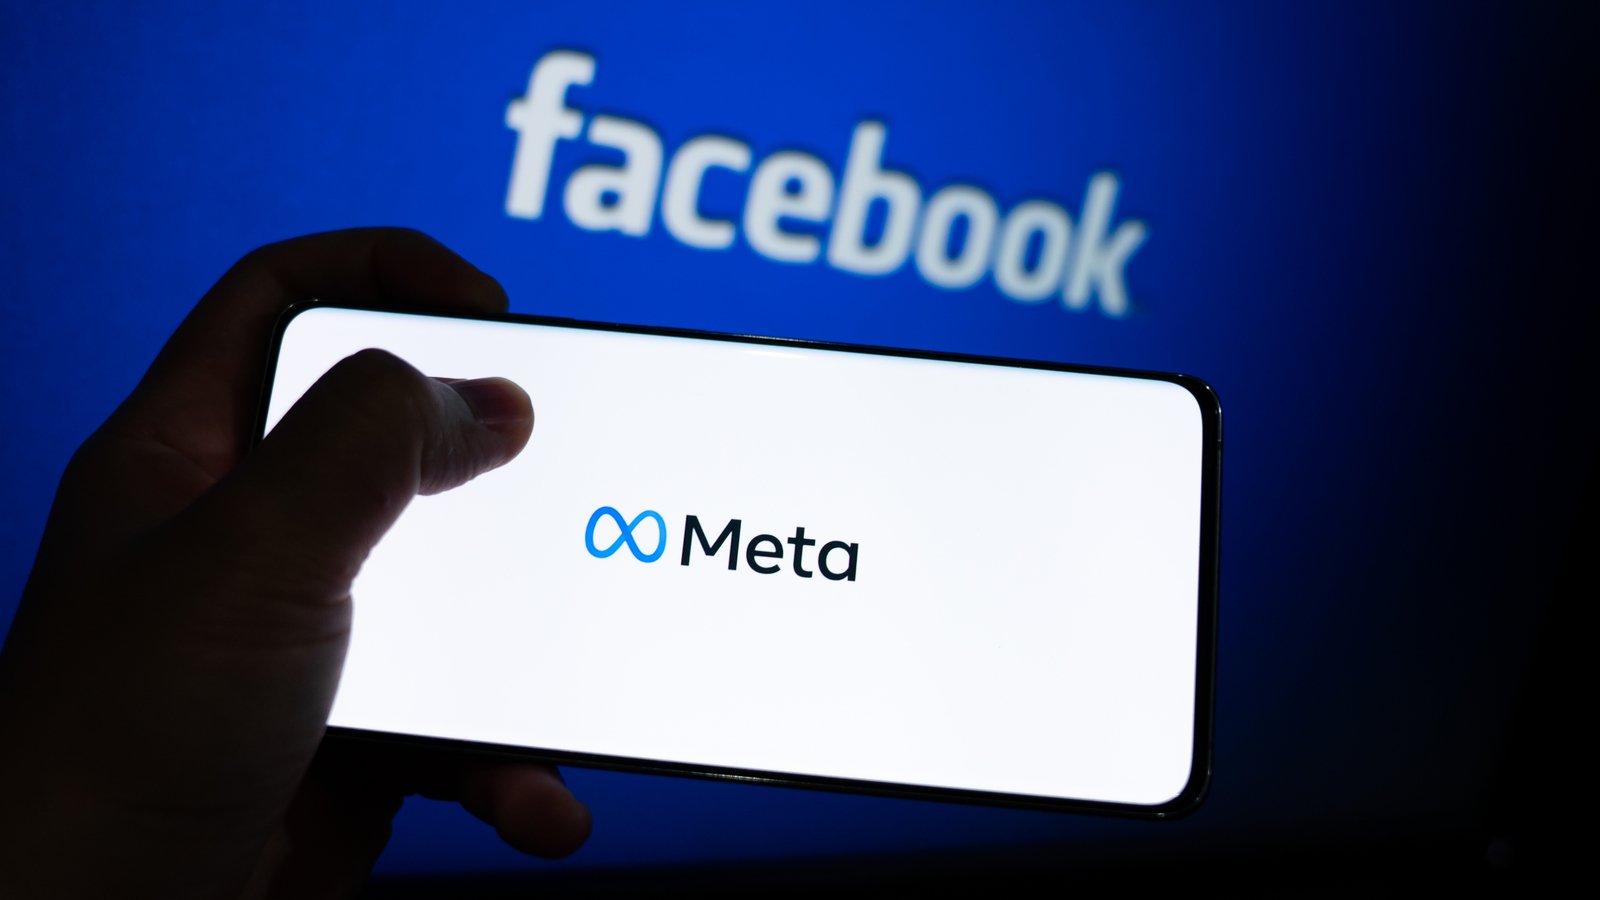 Meta Platforms Layoffs. META stock logo is shown on a device screen. Meta is the new corporate name of Facebook.